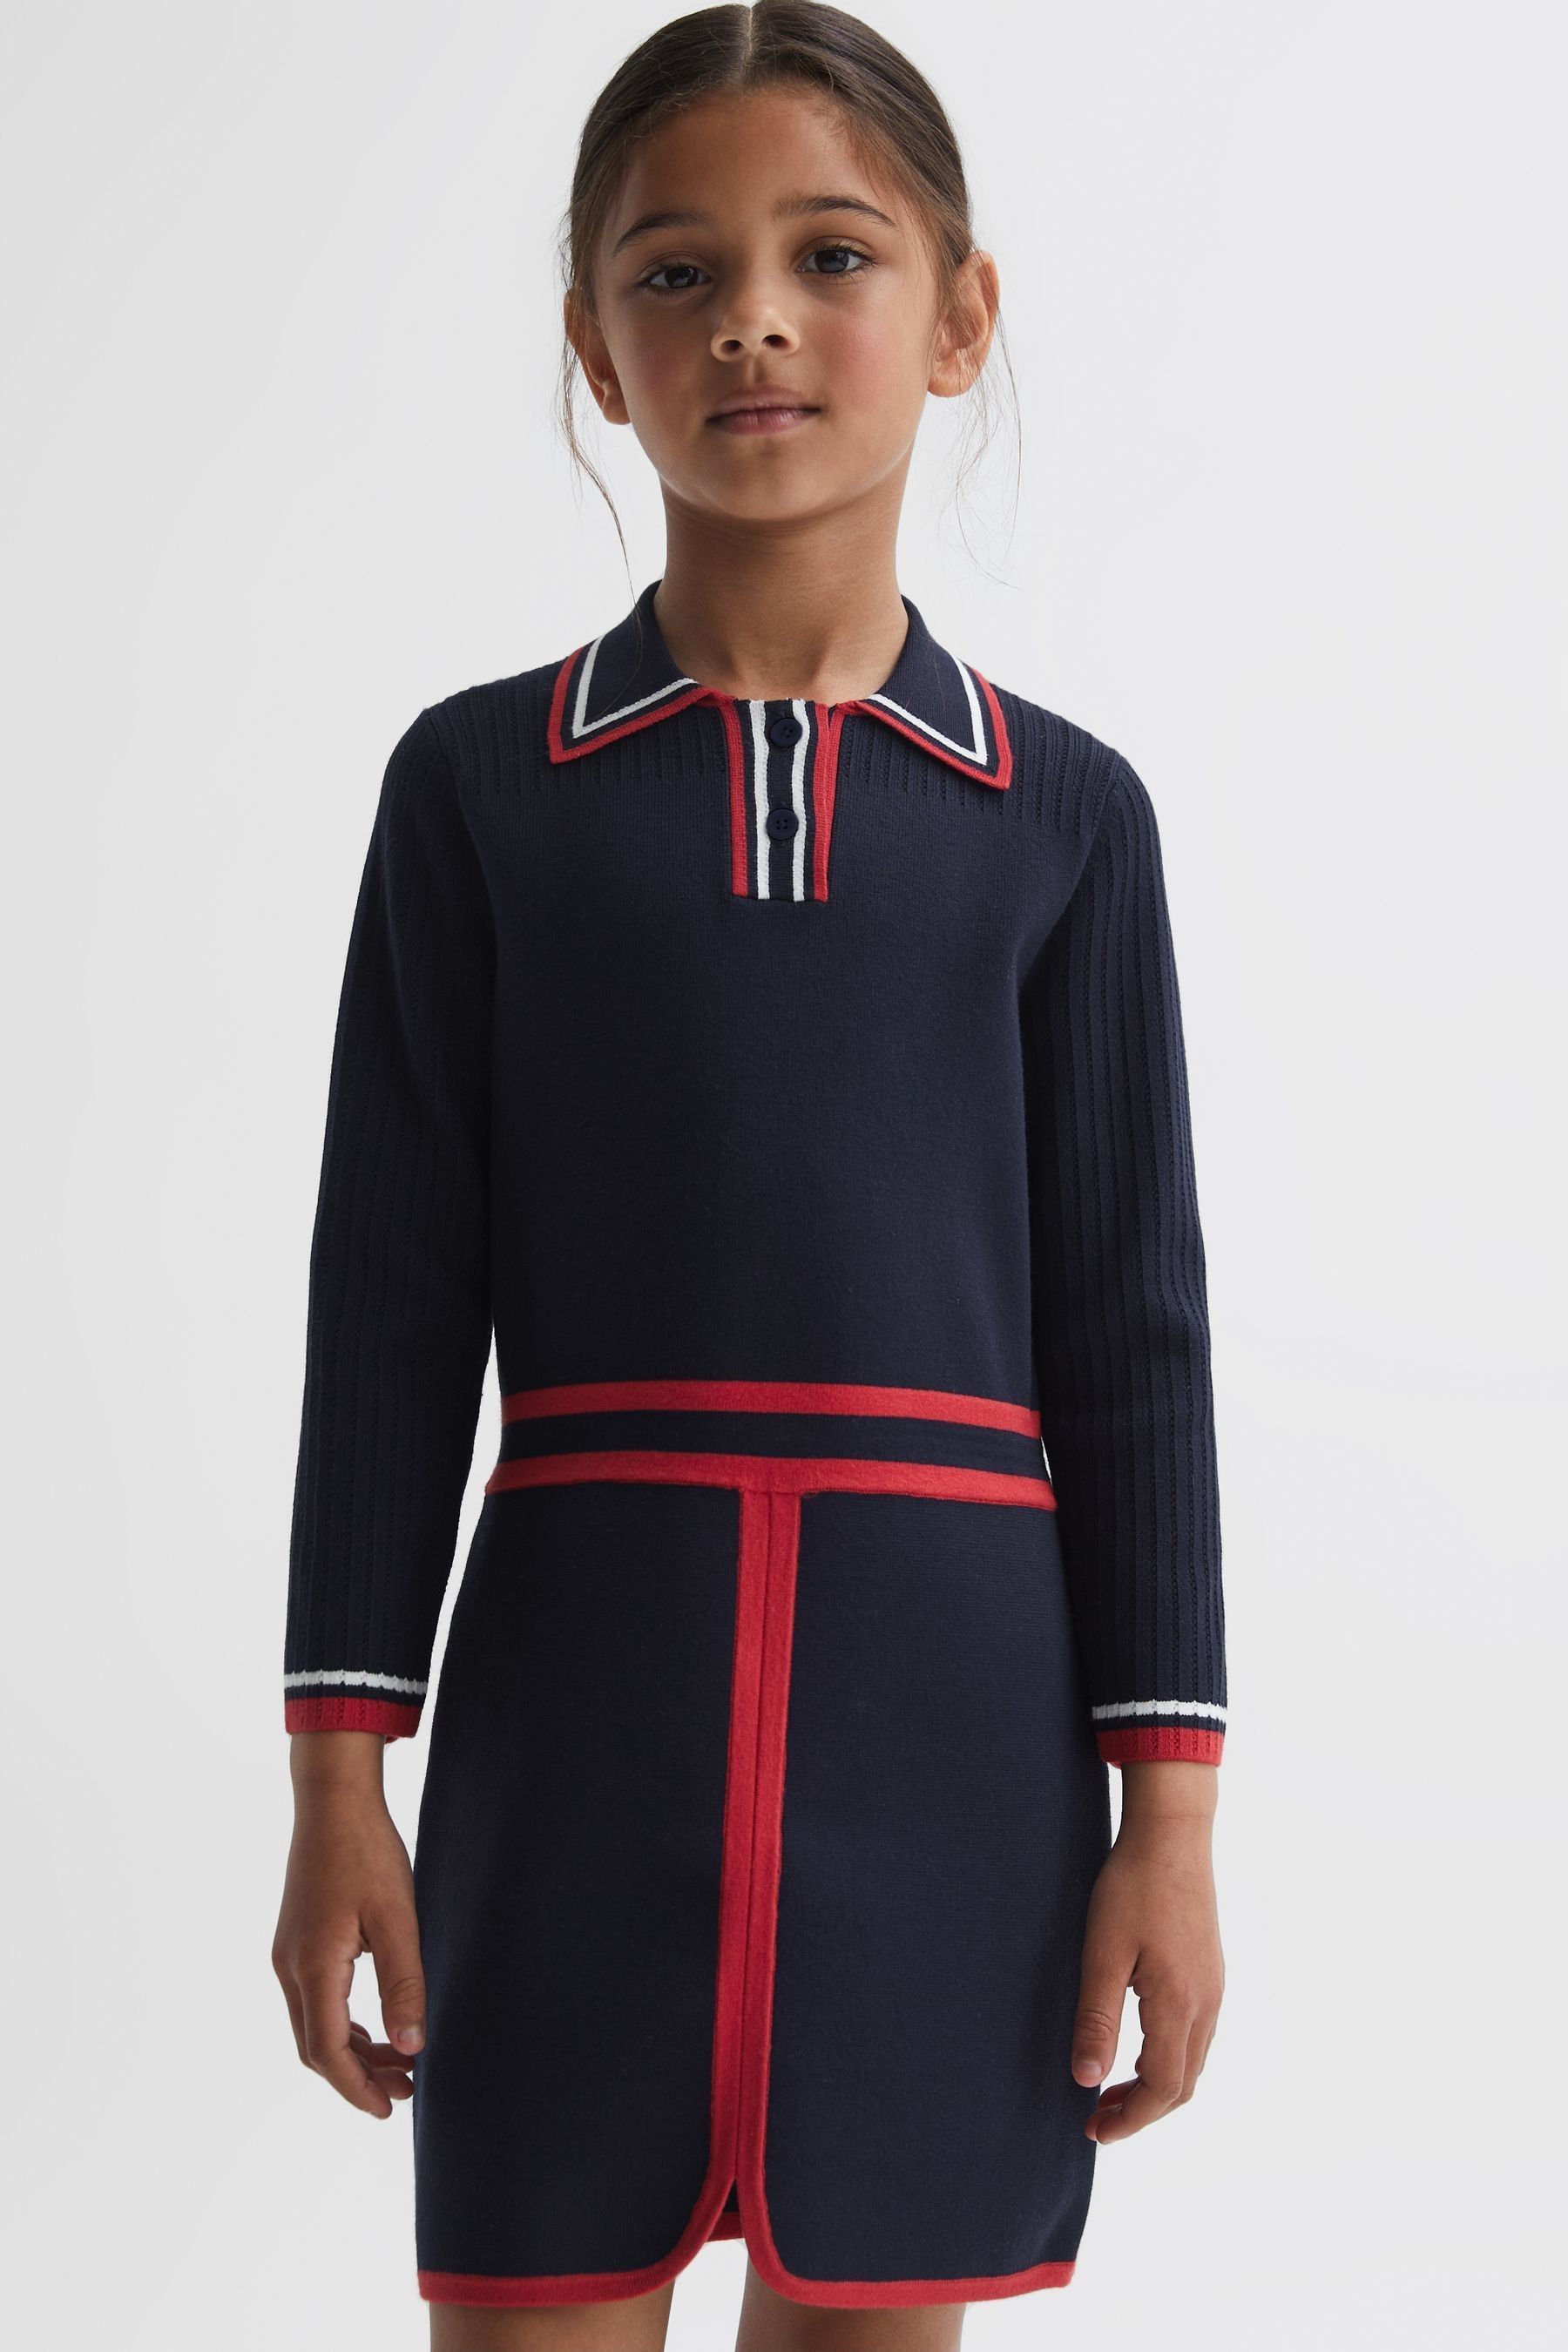 Reiss Kids' Ruby - Navy Junior Knitted Polo Dress, Age 5-6 Years